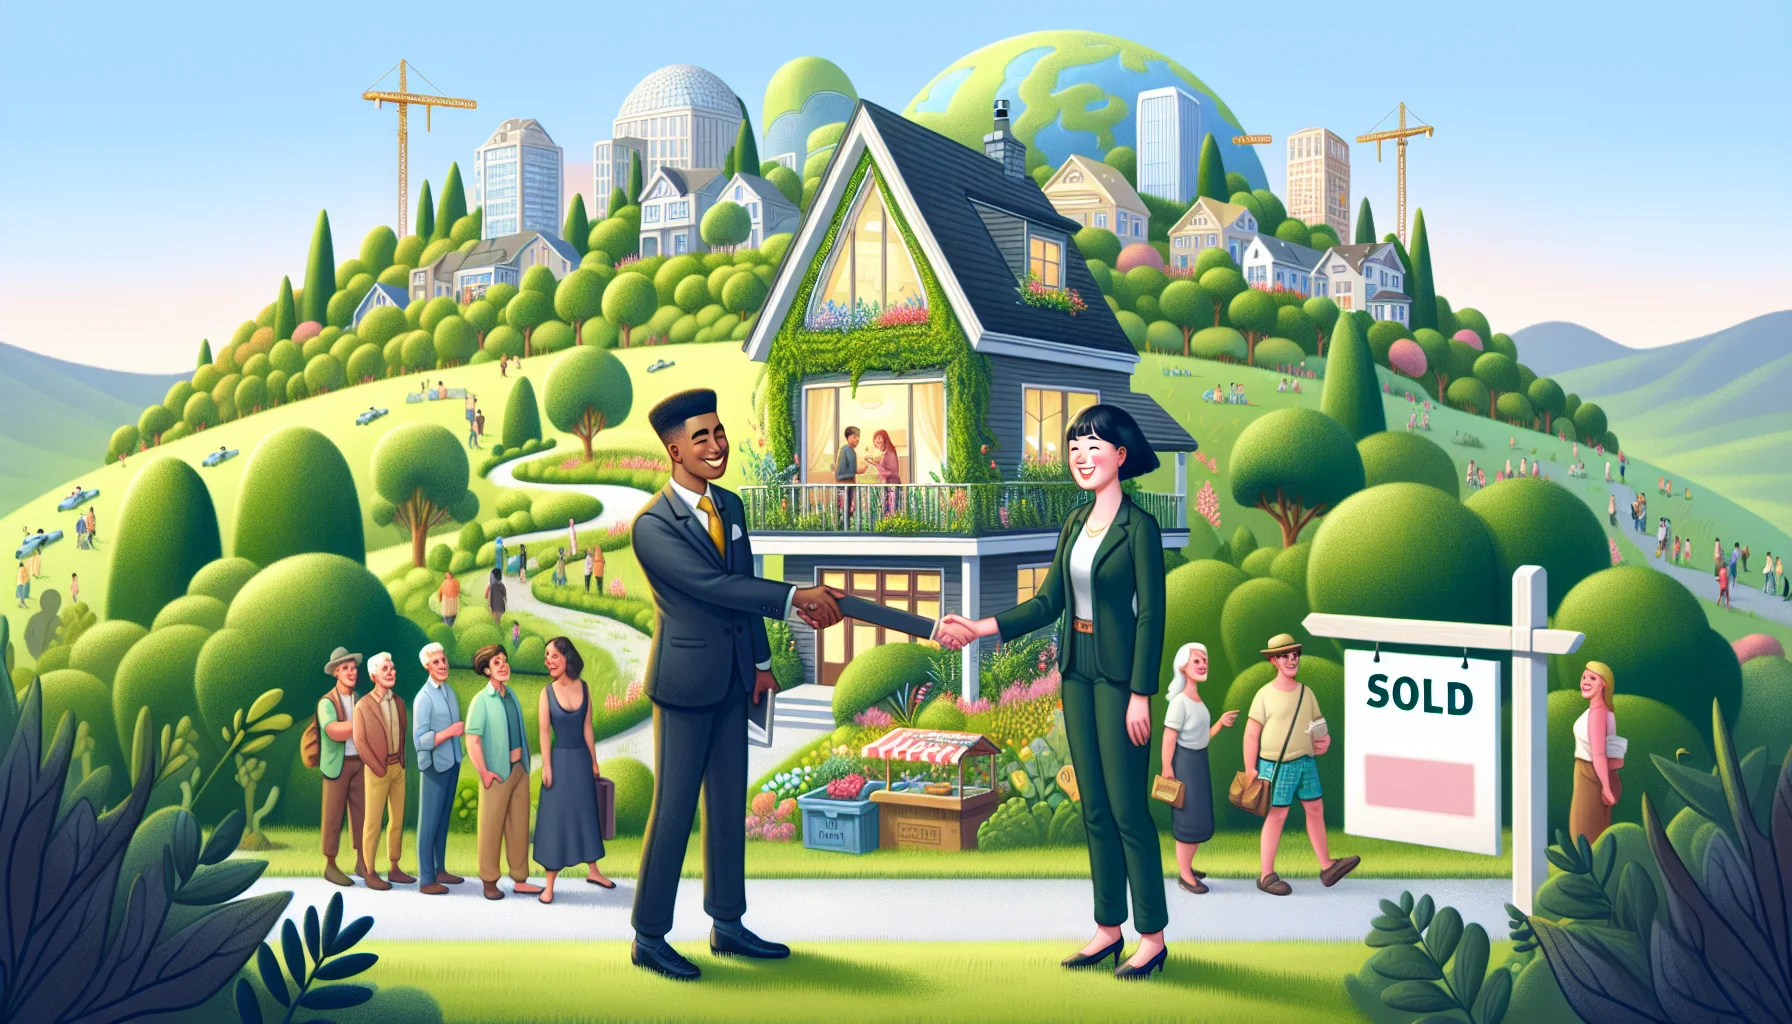 Imagine a whimsical scene that captures an idyllic real estate scenario. Picture a luxurious, eco-friendly house on a hill, surrounded by lush, manicured gardens, and a vibrant market nearby. The sign on the lawn reads 'Sold' and a smiling real estate agent, an Asian woman in a smart suit, is shaking hands with a delighted new homeowner, a Black man wearing casual attire, outside. In the background, a group of potential buyers, with diverse genders and descents, are lining up for the next open house.